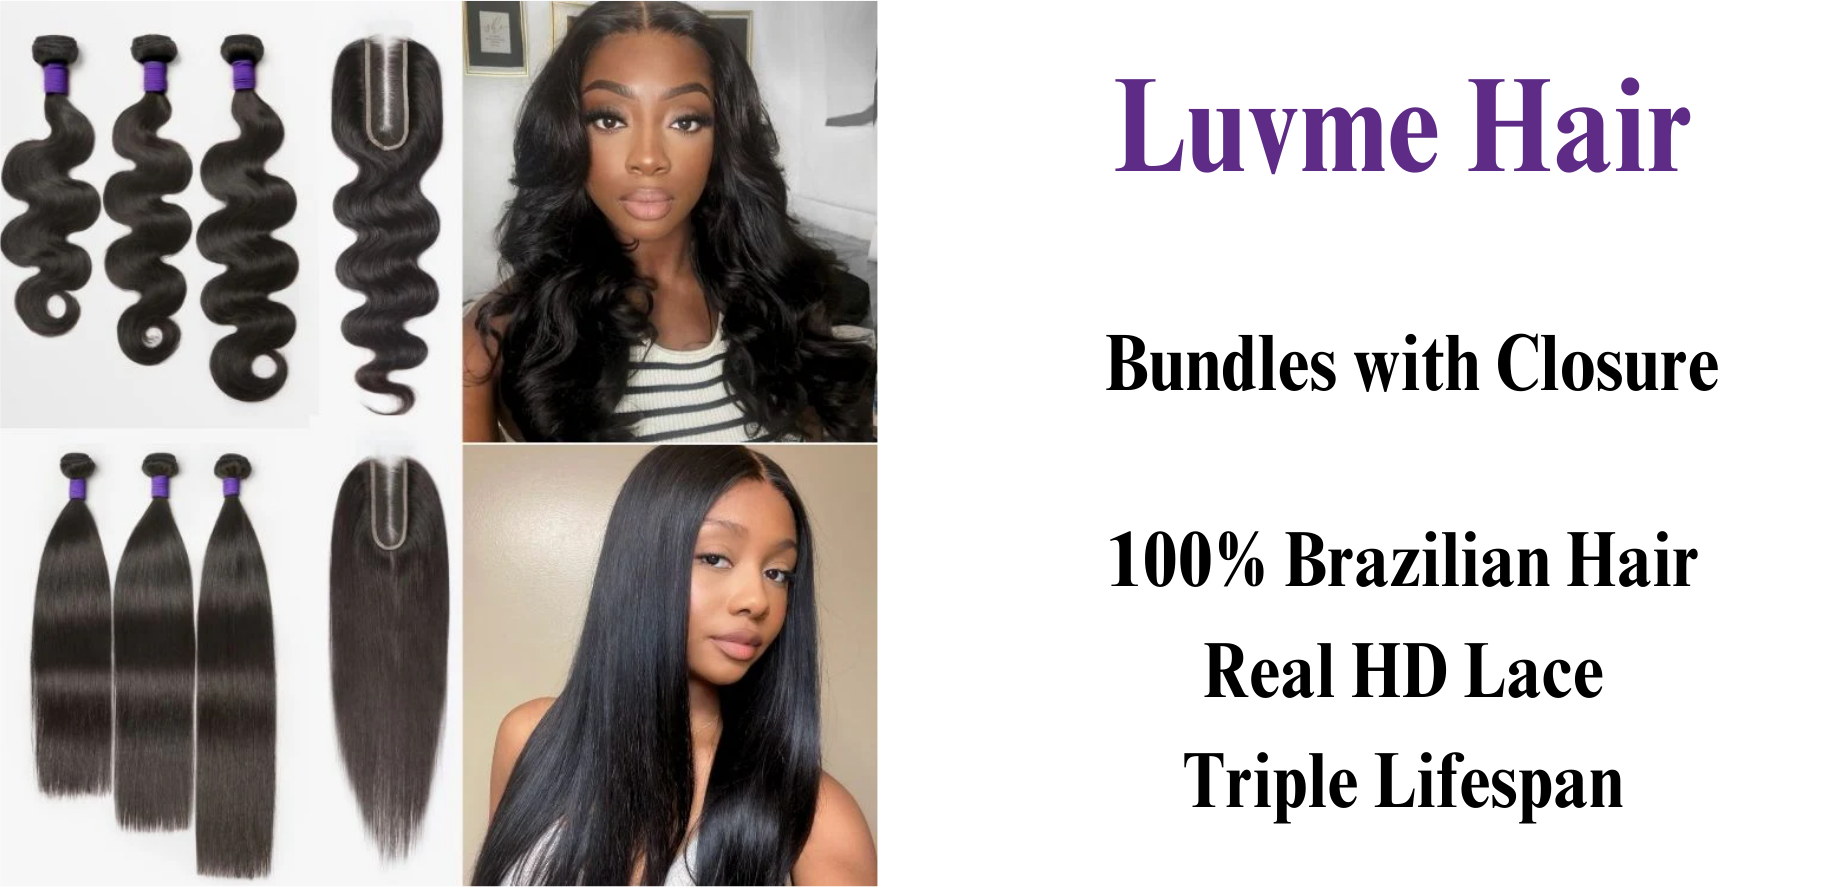 Luvme Hair Bundles with Closure: Combining Luxury, Quality, and Versatility